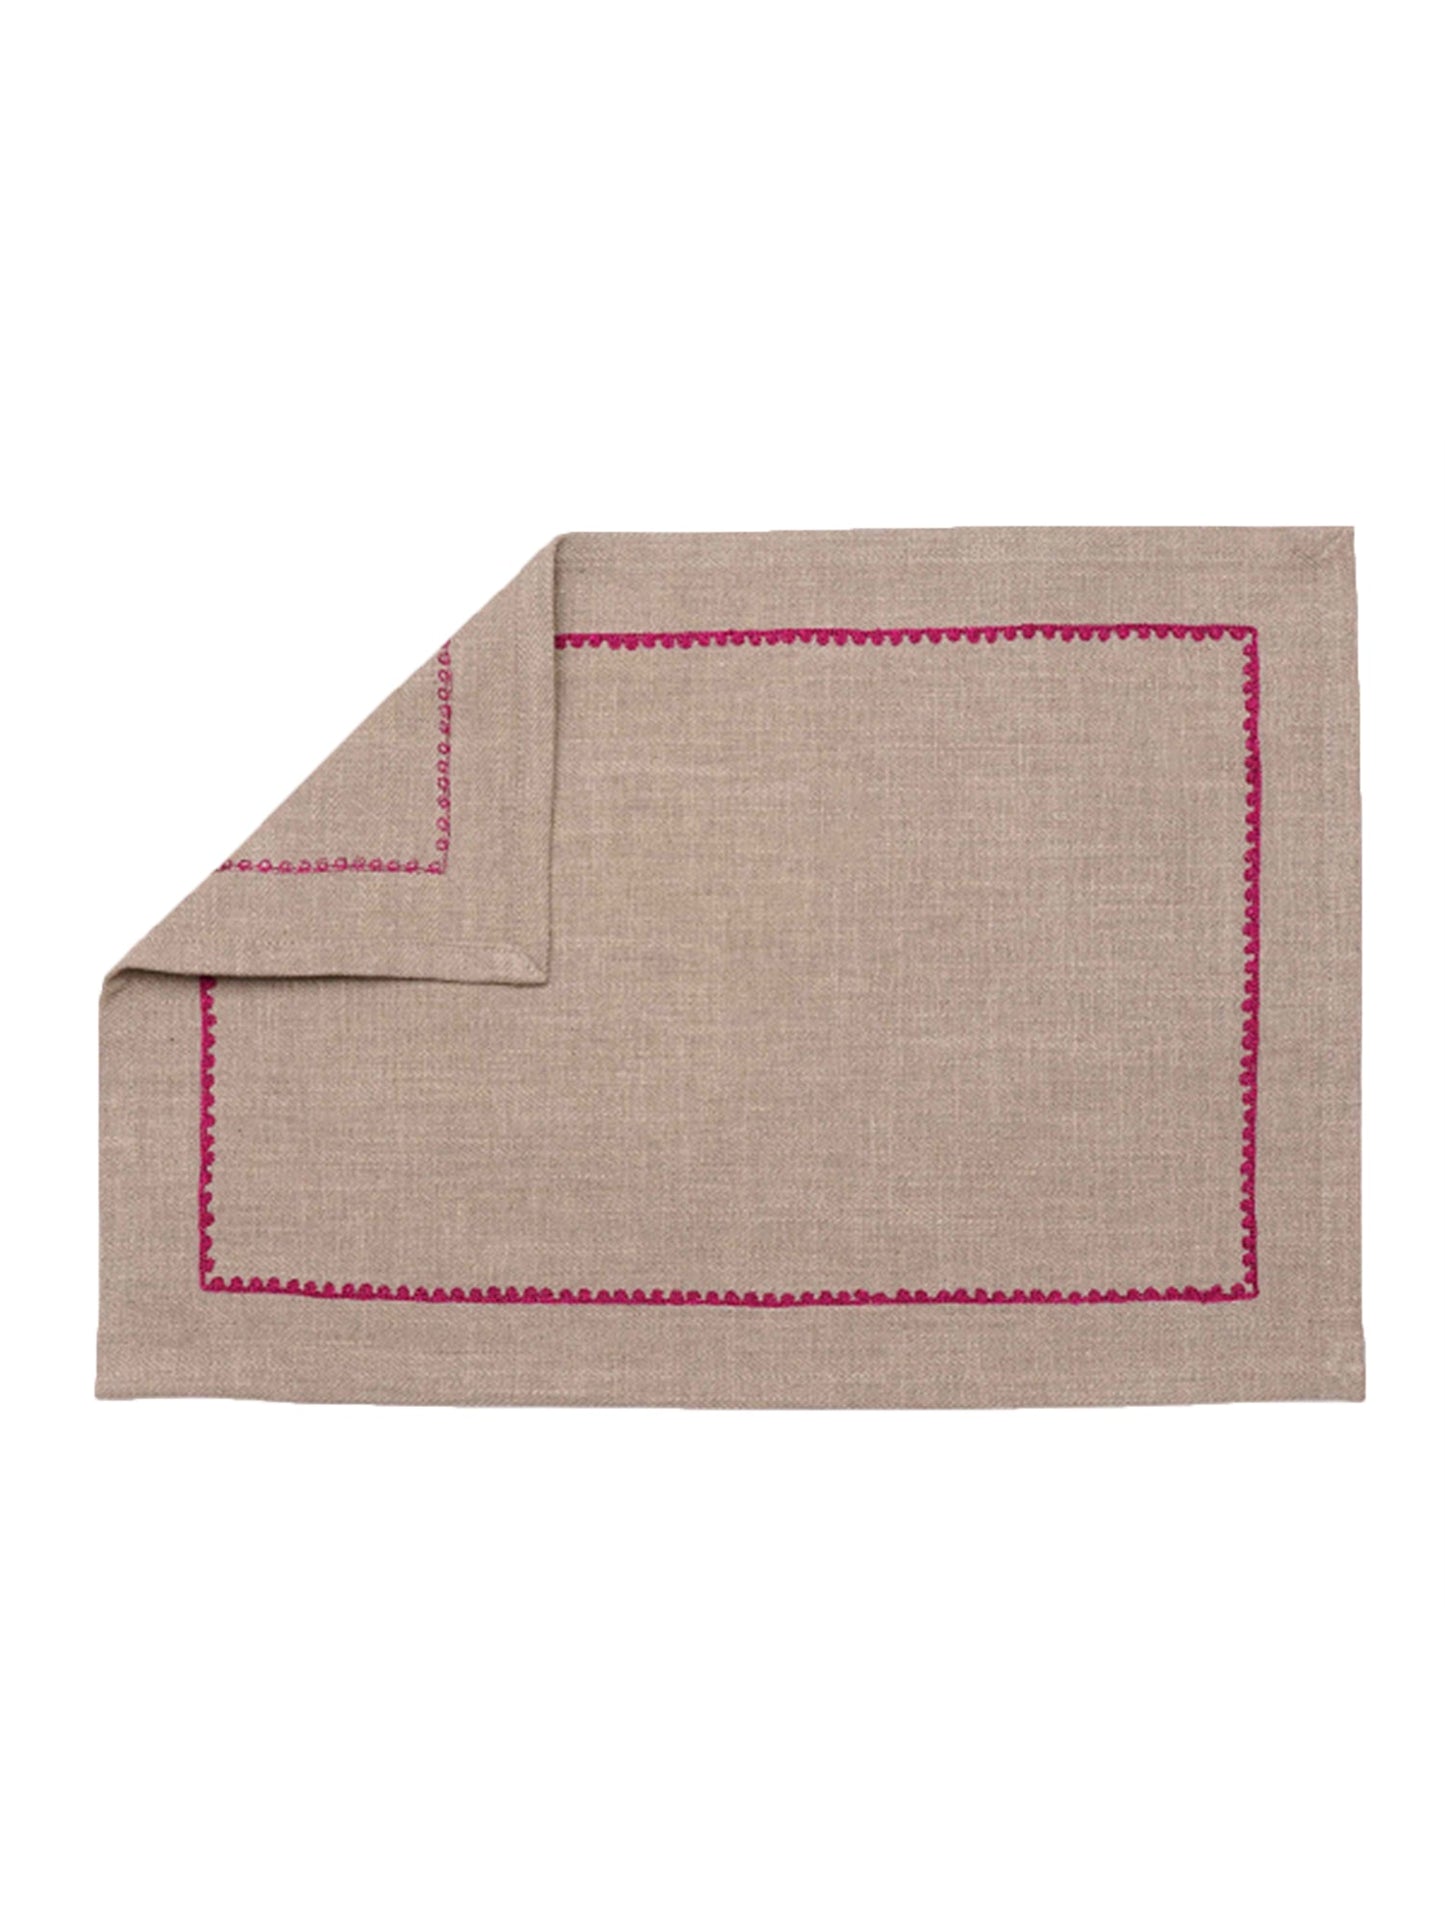 red embroidered dinner table placemats in gray shades - 13x19 inch 